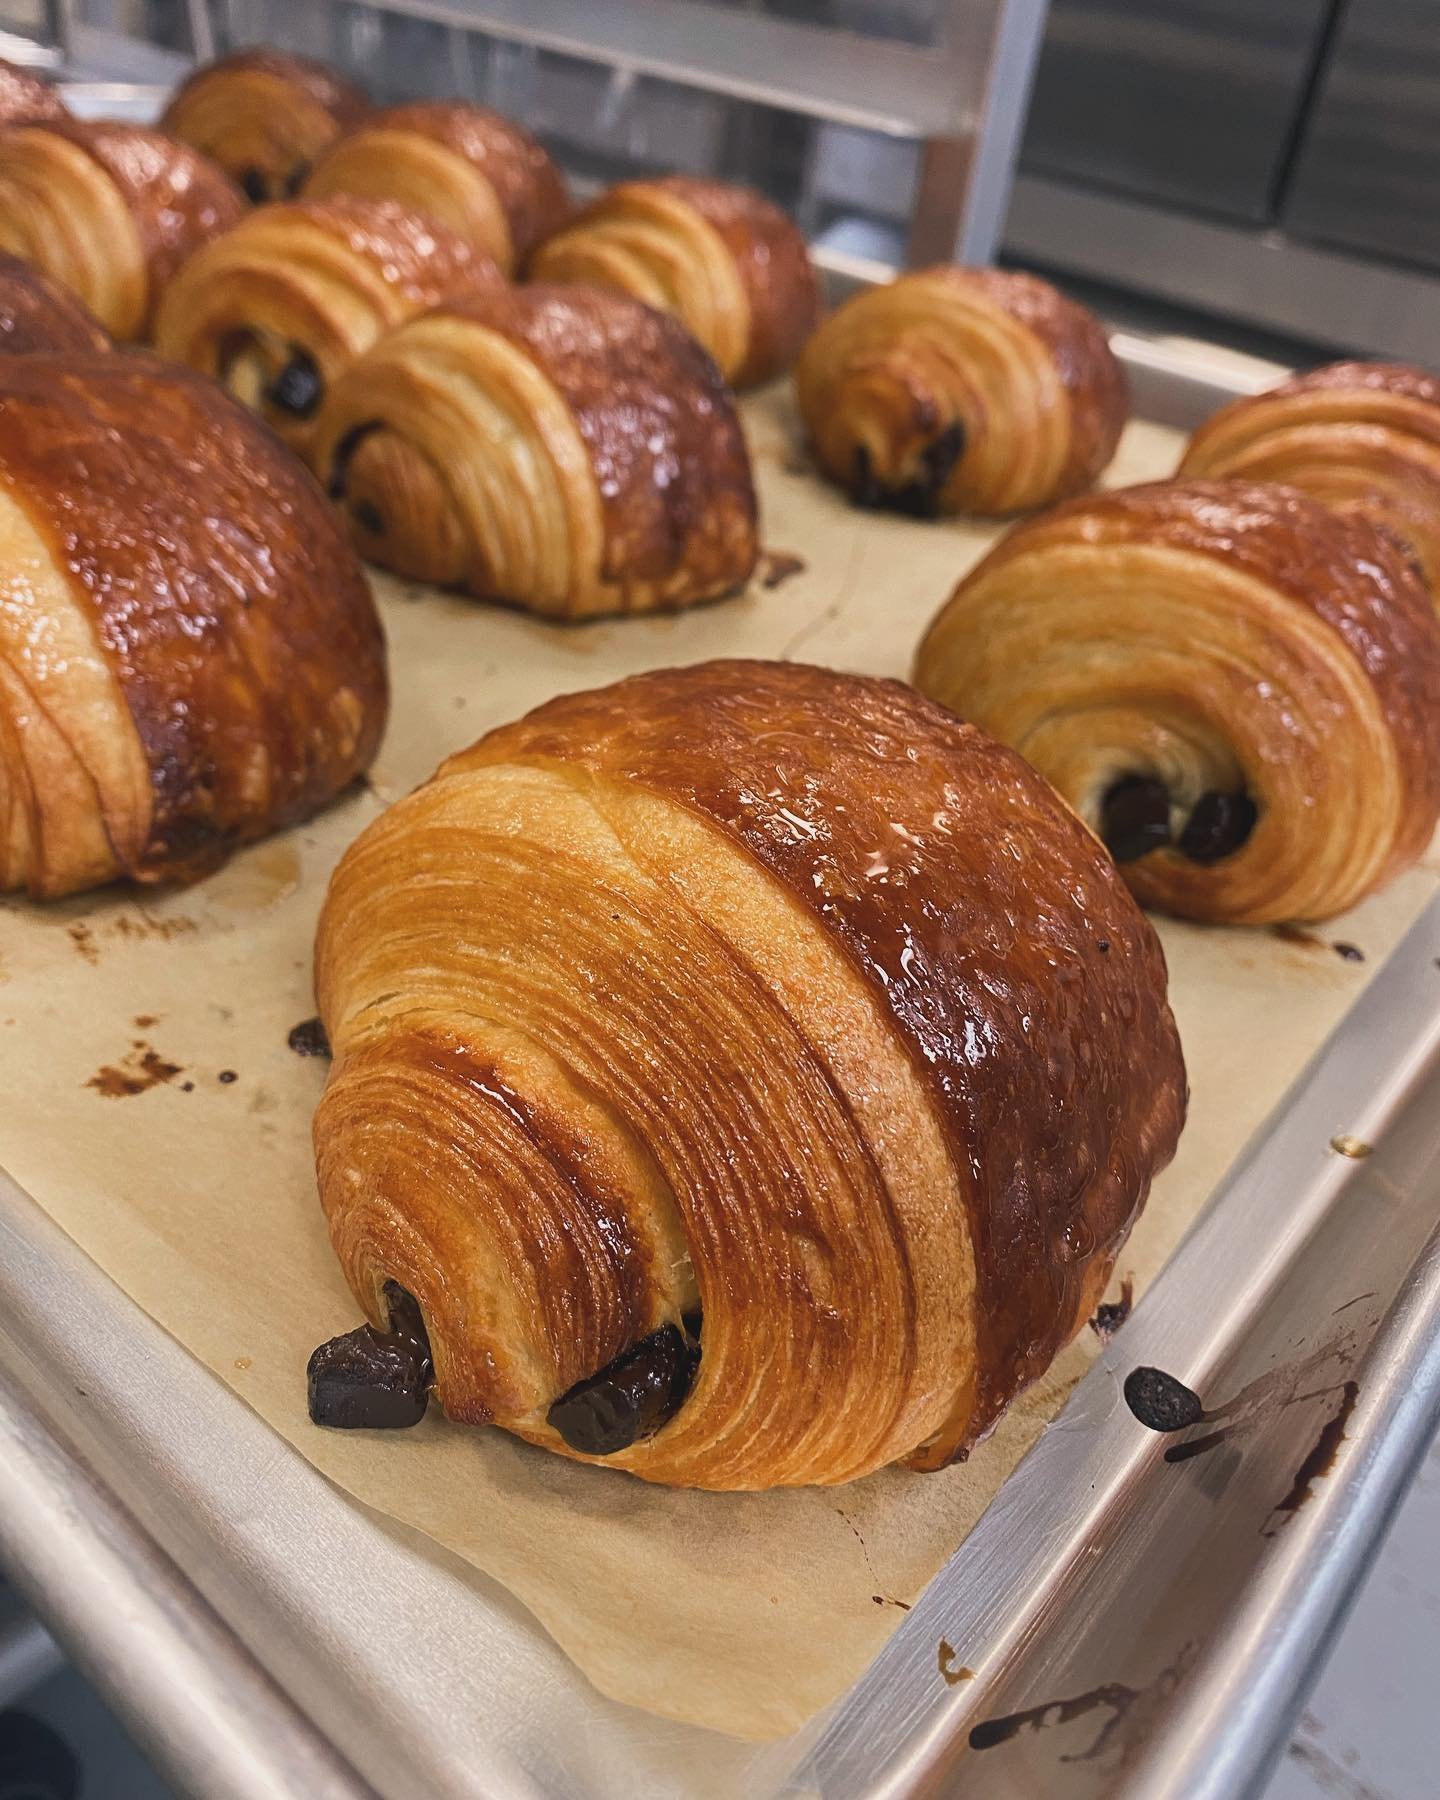 FUN FACT: Pain au Chocolat is our #1 selling bakery item. 

Layers of buttery croissant, with a crunchy outside and soft inside filled with two @valrhonausa chocolate batons. We agree with your top pick!

Can you guess our #1 selling coffee? Tell us 